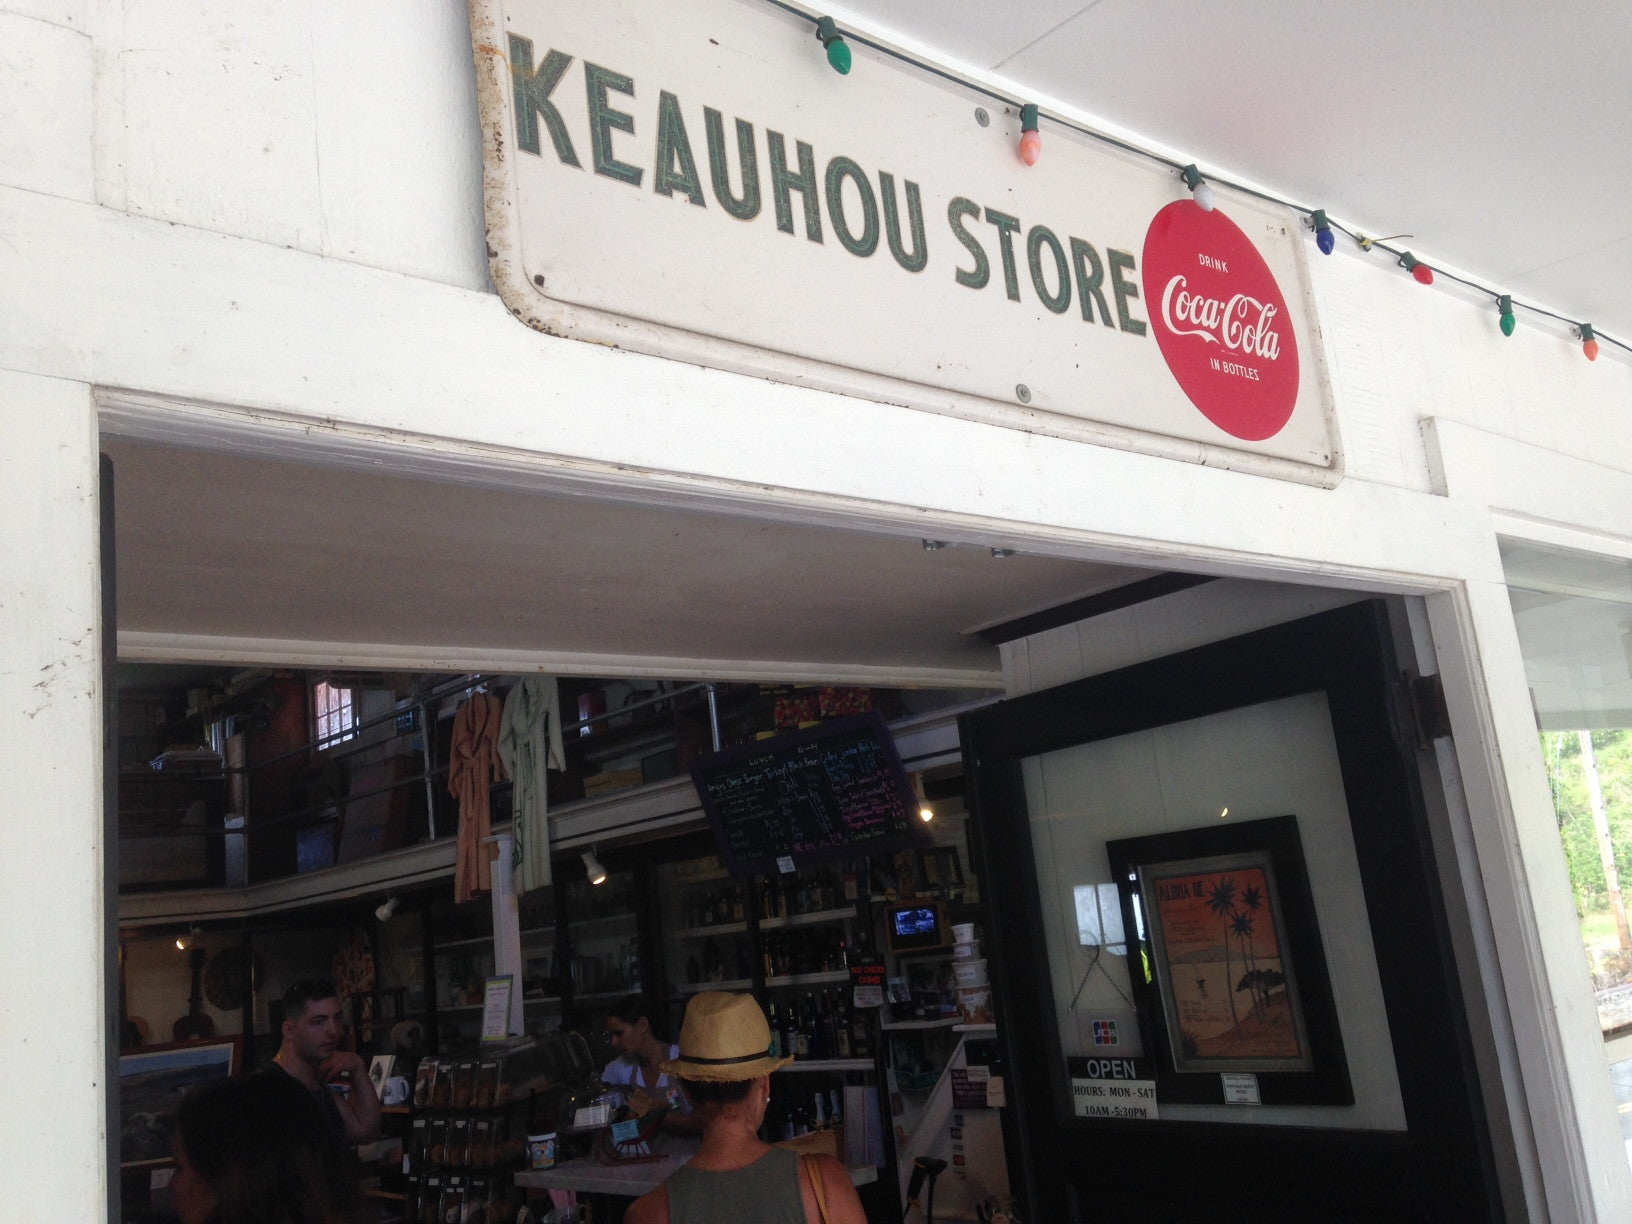 The Keauhou Store - A Little Slice of History